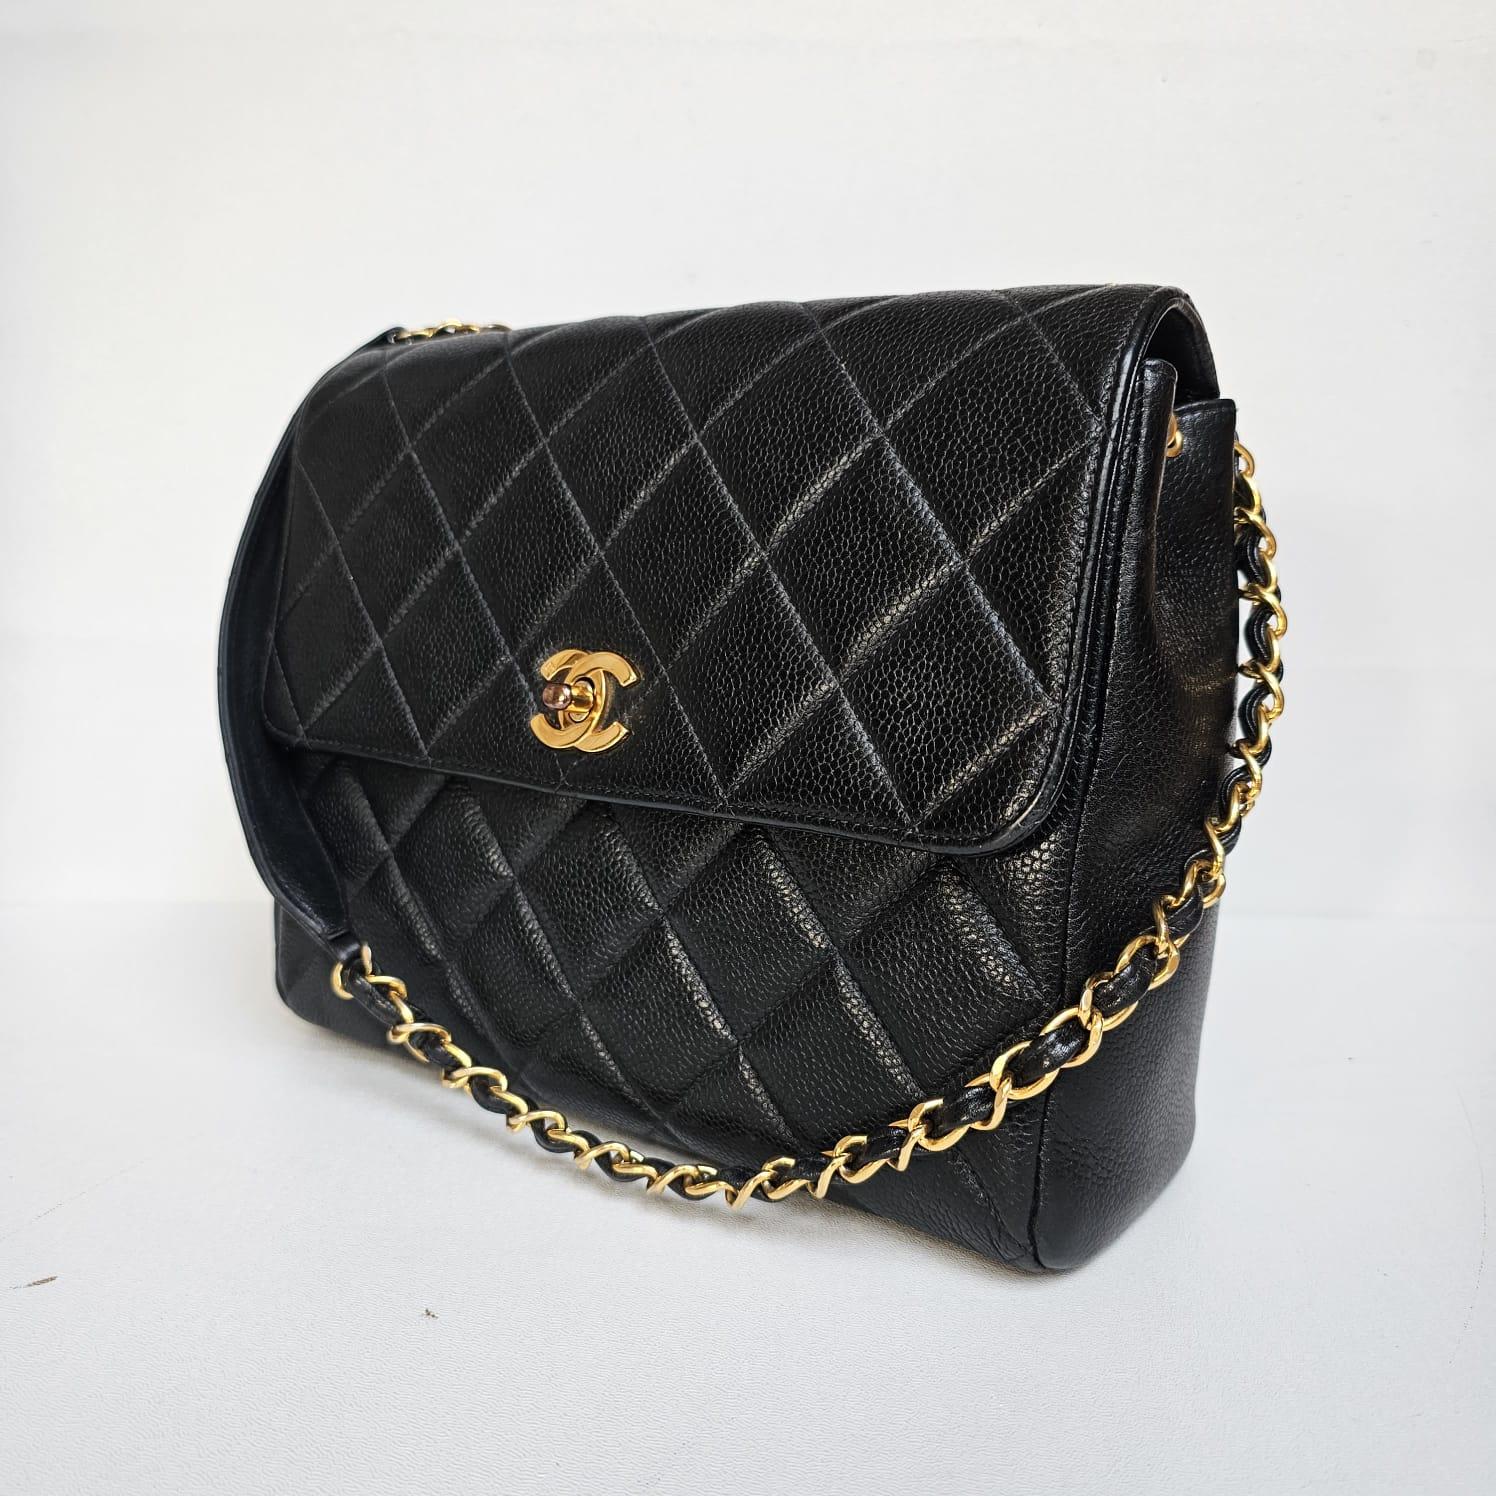 Vintage Chanel Black Caviar Quilted Square Flap Bag 10